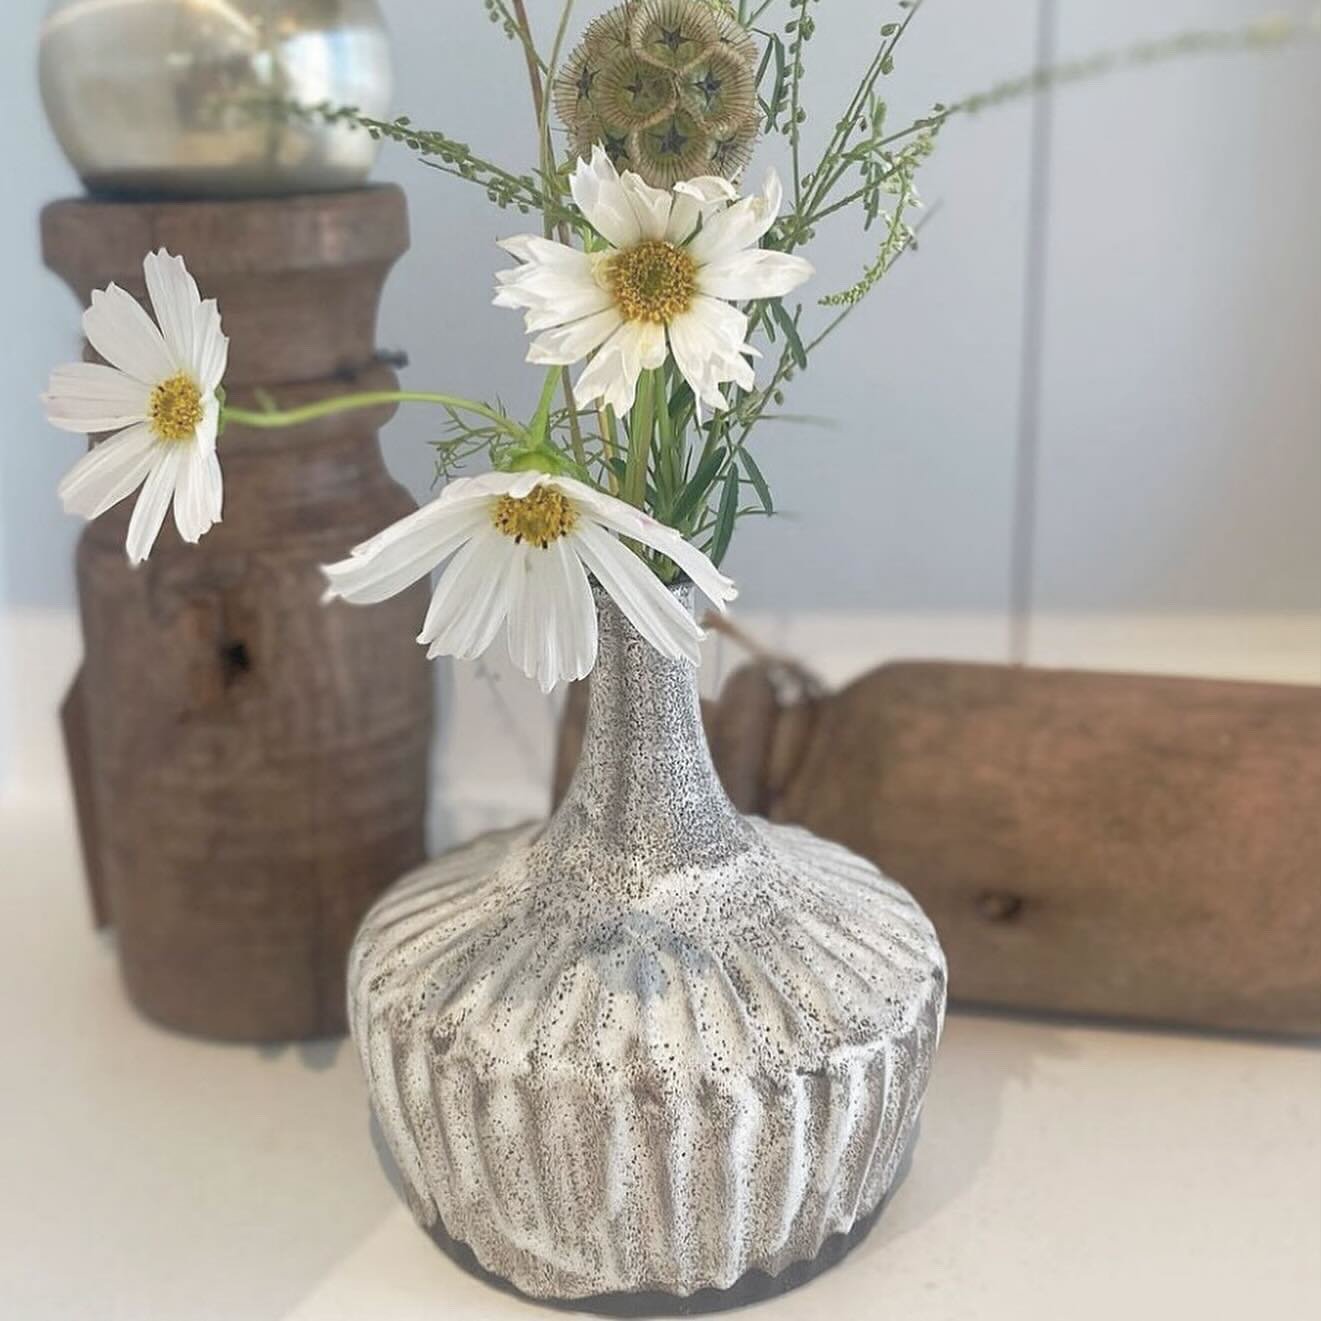 Mother&rsquo;s Day Gift giving just got allot easier with our gift giving ideas. 

.
#CoastalDecor #CoastalLiving  #MonmouthBeachNJ #MonmouthCountyDesigner #Smmakelifebeautiful #l#MyCovetedHome  #ShowEmYourStyled #HowYouHome #InspoToYourHome  #Simply